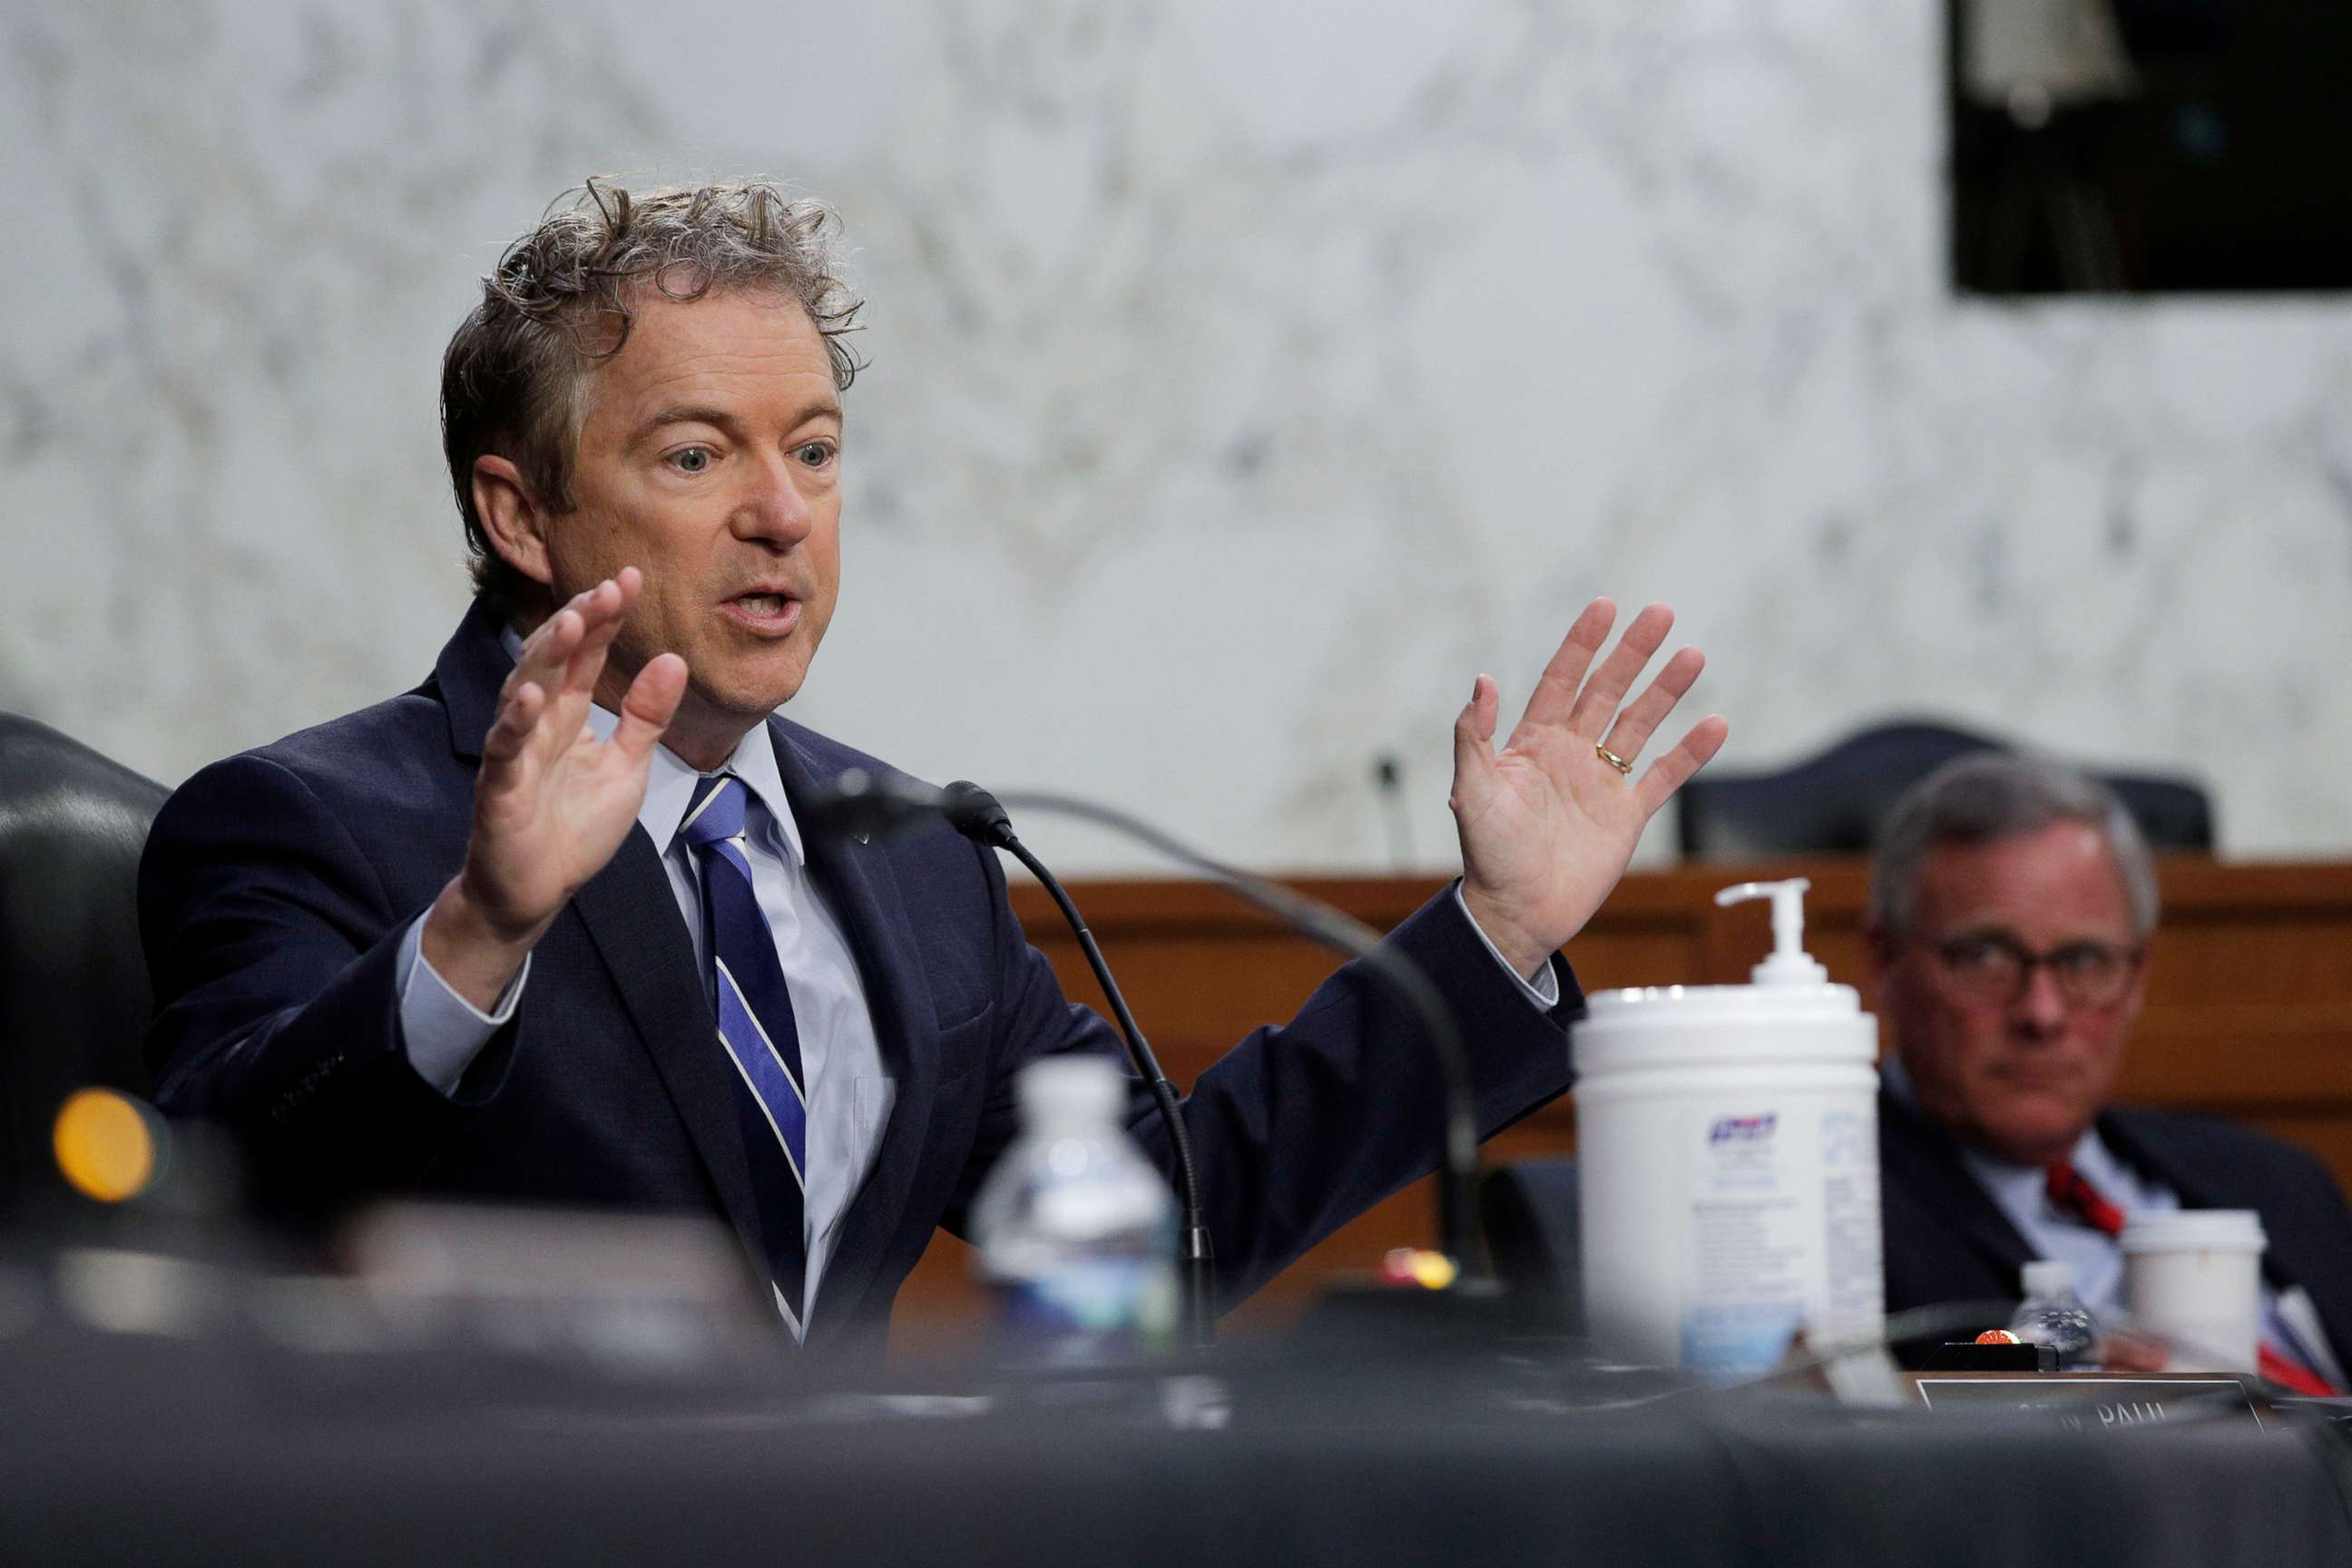 PHOTO: Sen. Rand Paul speaks at the confirmation hearing for Vivek Murthy and Rachel Levine before the Senate Health, Education, Labor, and Pensions committee Feb. 25, 2021.